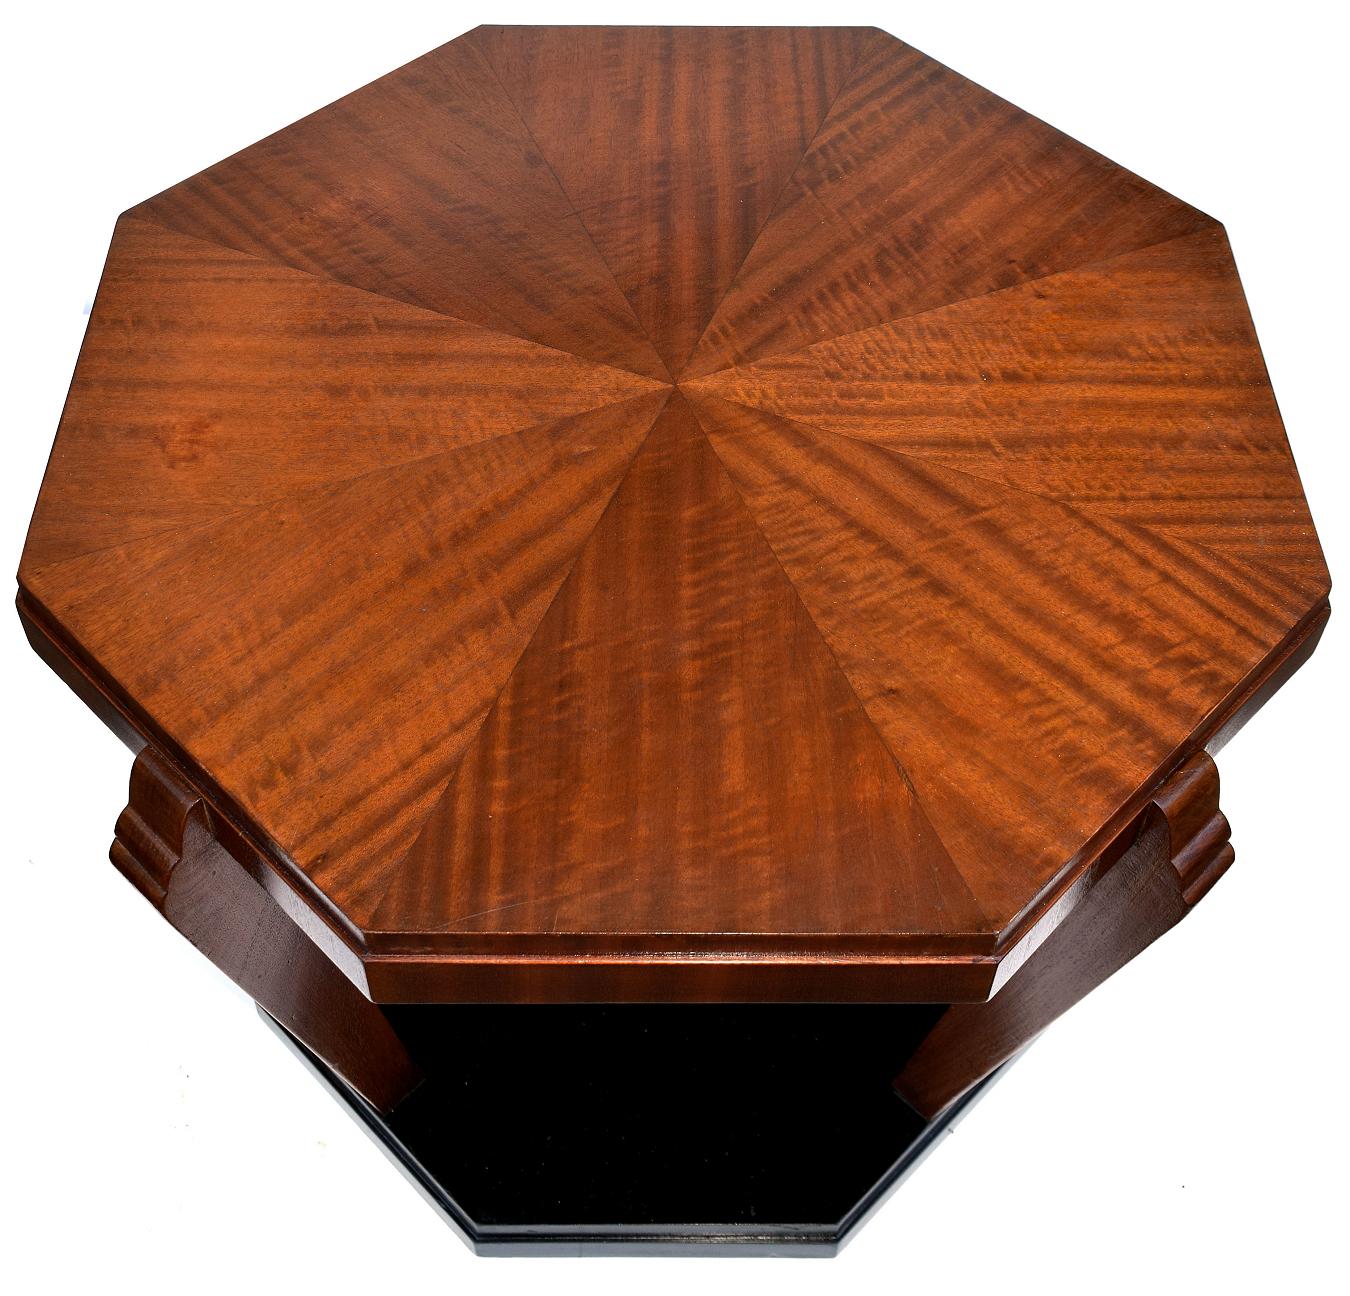 Dating to the 1930s and originating in England is this very stylish occasional table. Ideal for many settings and uses. With the combination of woods of a figured Mahogany top and legs with ebonized plinth makes for a striking look. We've had this